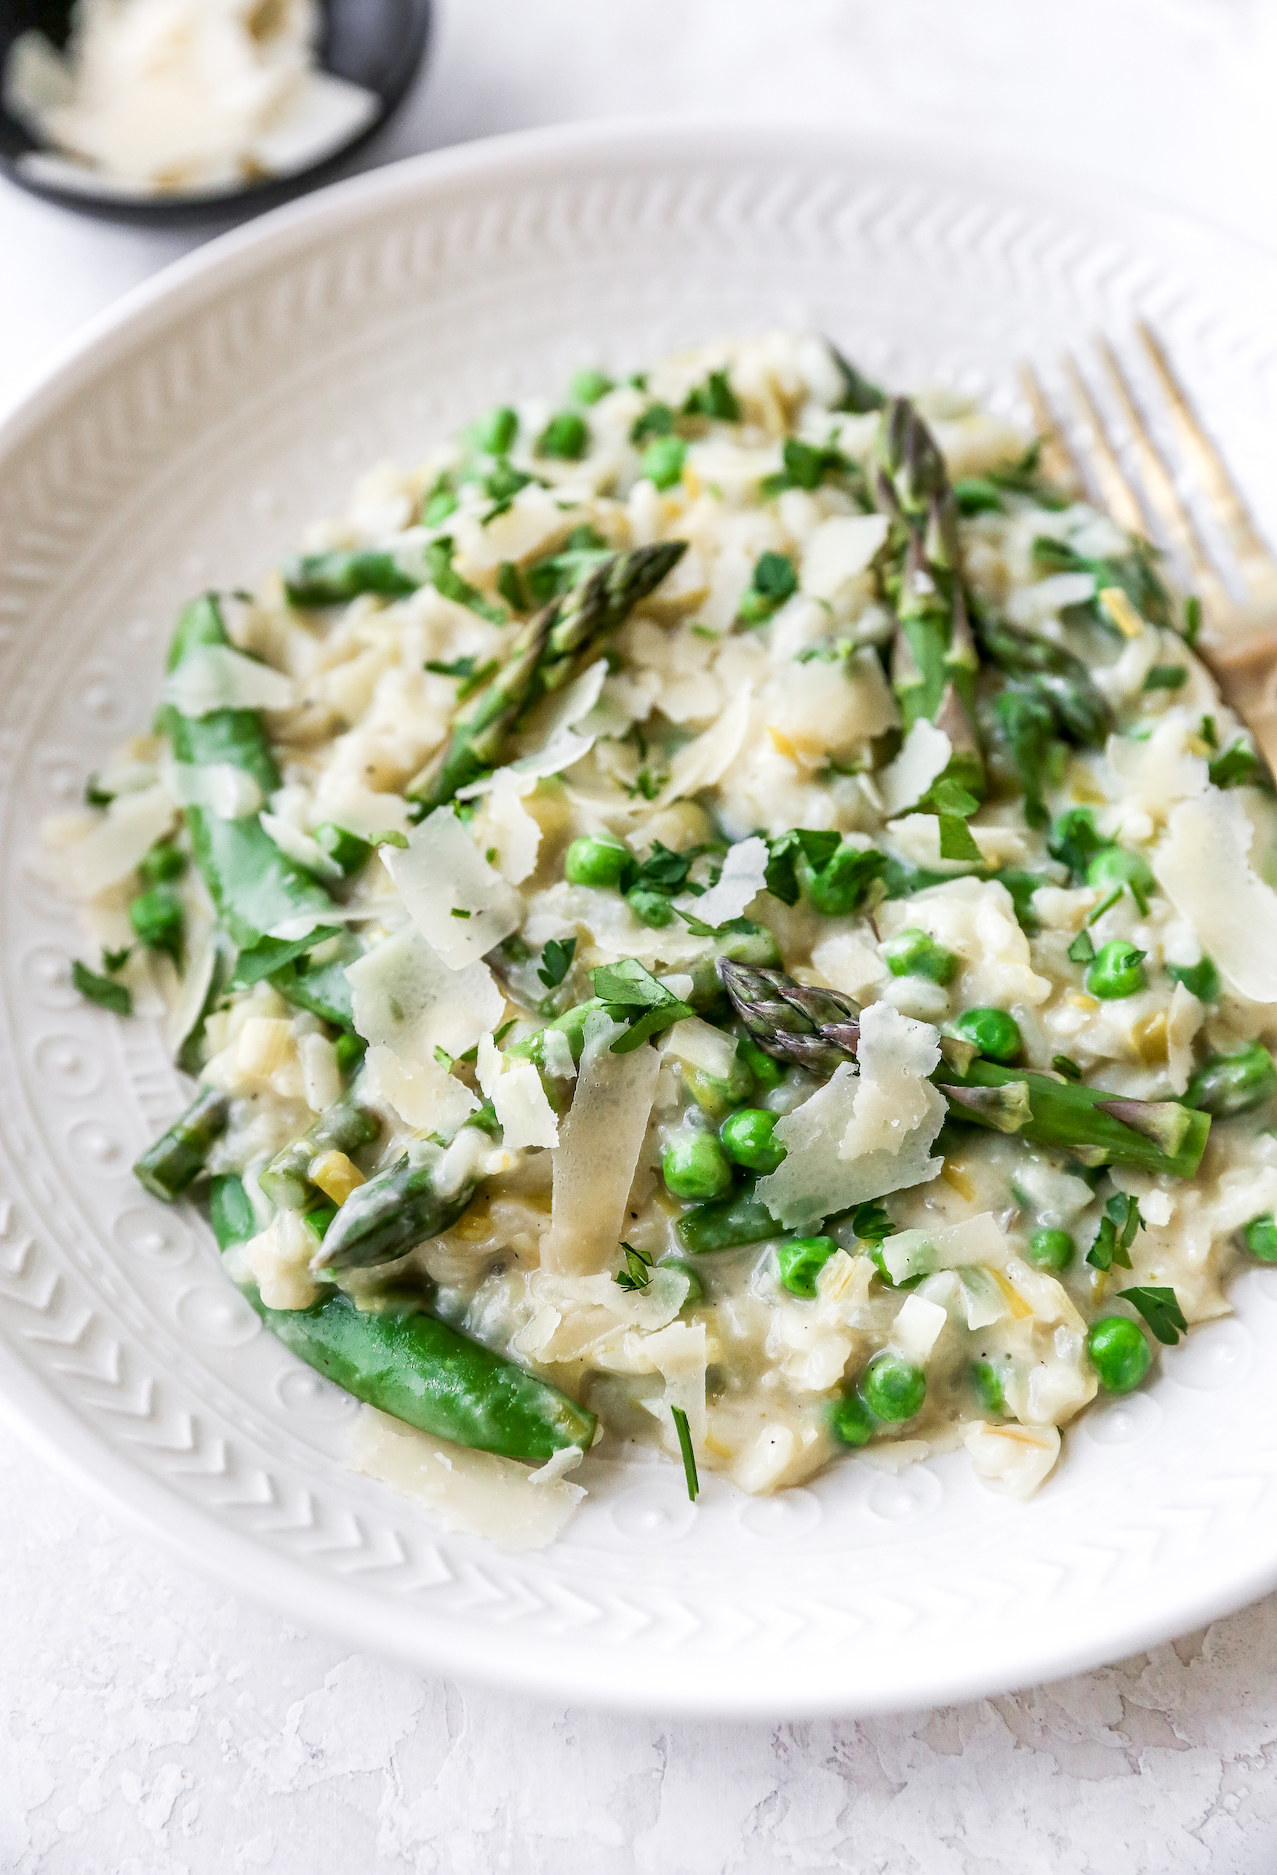 Spring risotto with peas, asparagus, leeks, and Parmesan.